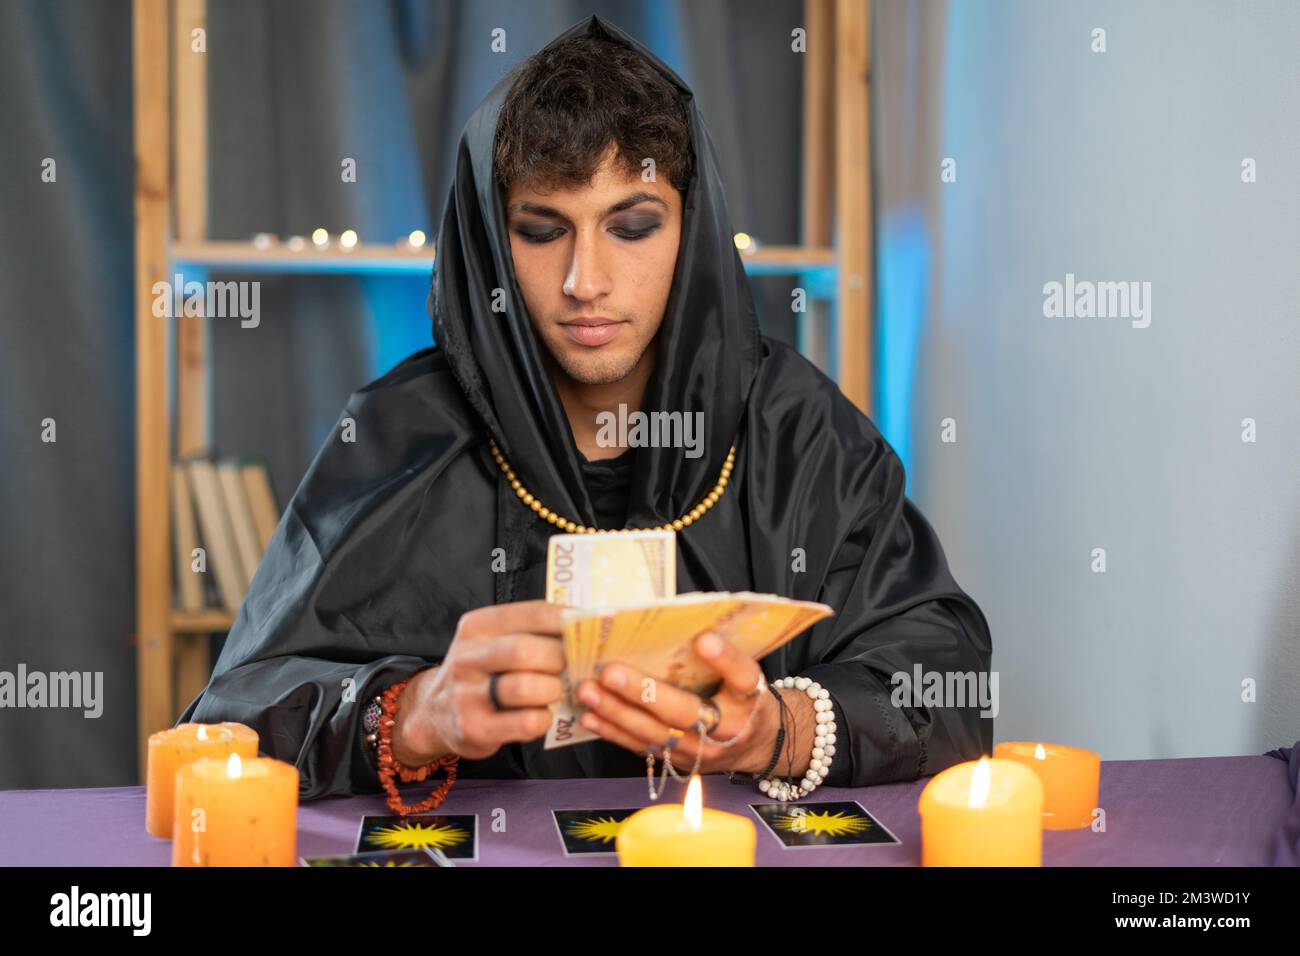 fortune teller man reading tarot cards on a table with candles. Stock Photo